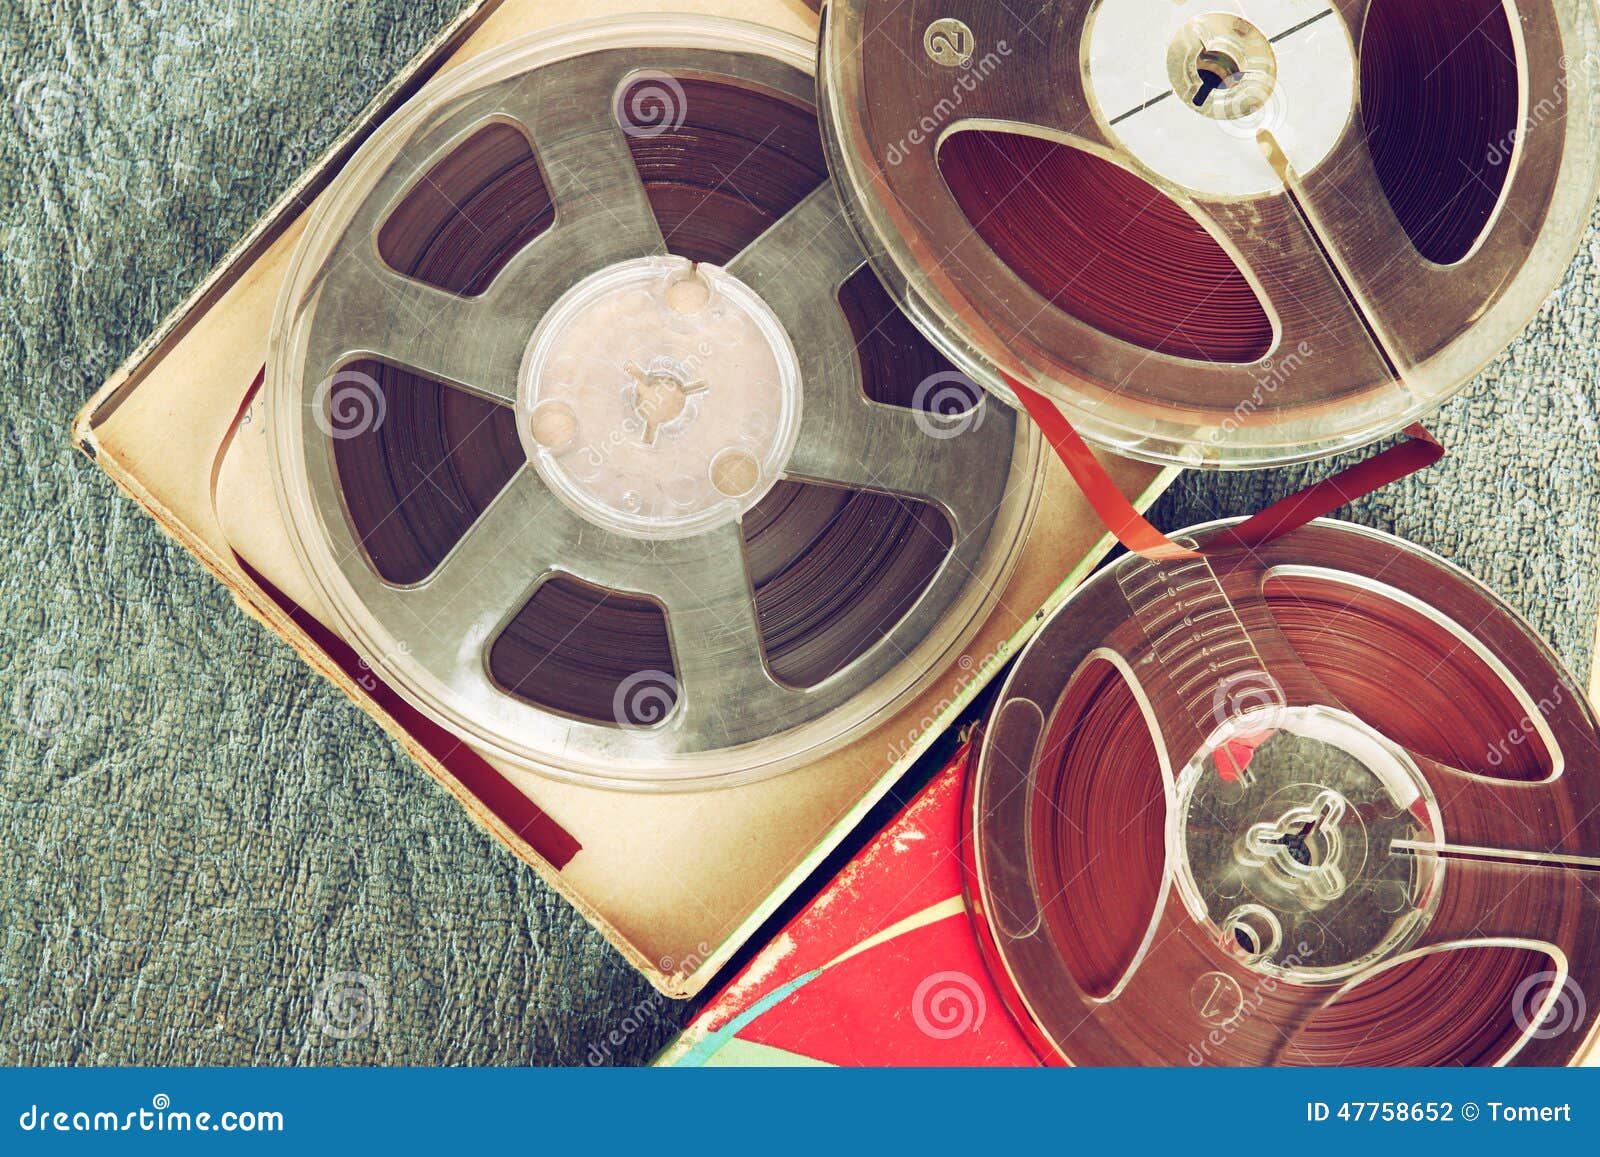 https://thumbs.dreamstime.com/z/top-view-old-sound-recording-tape-reel-to-reel-type-box-47758652.jpg